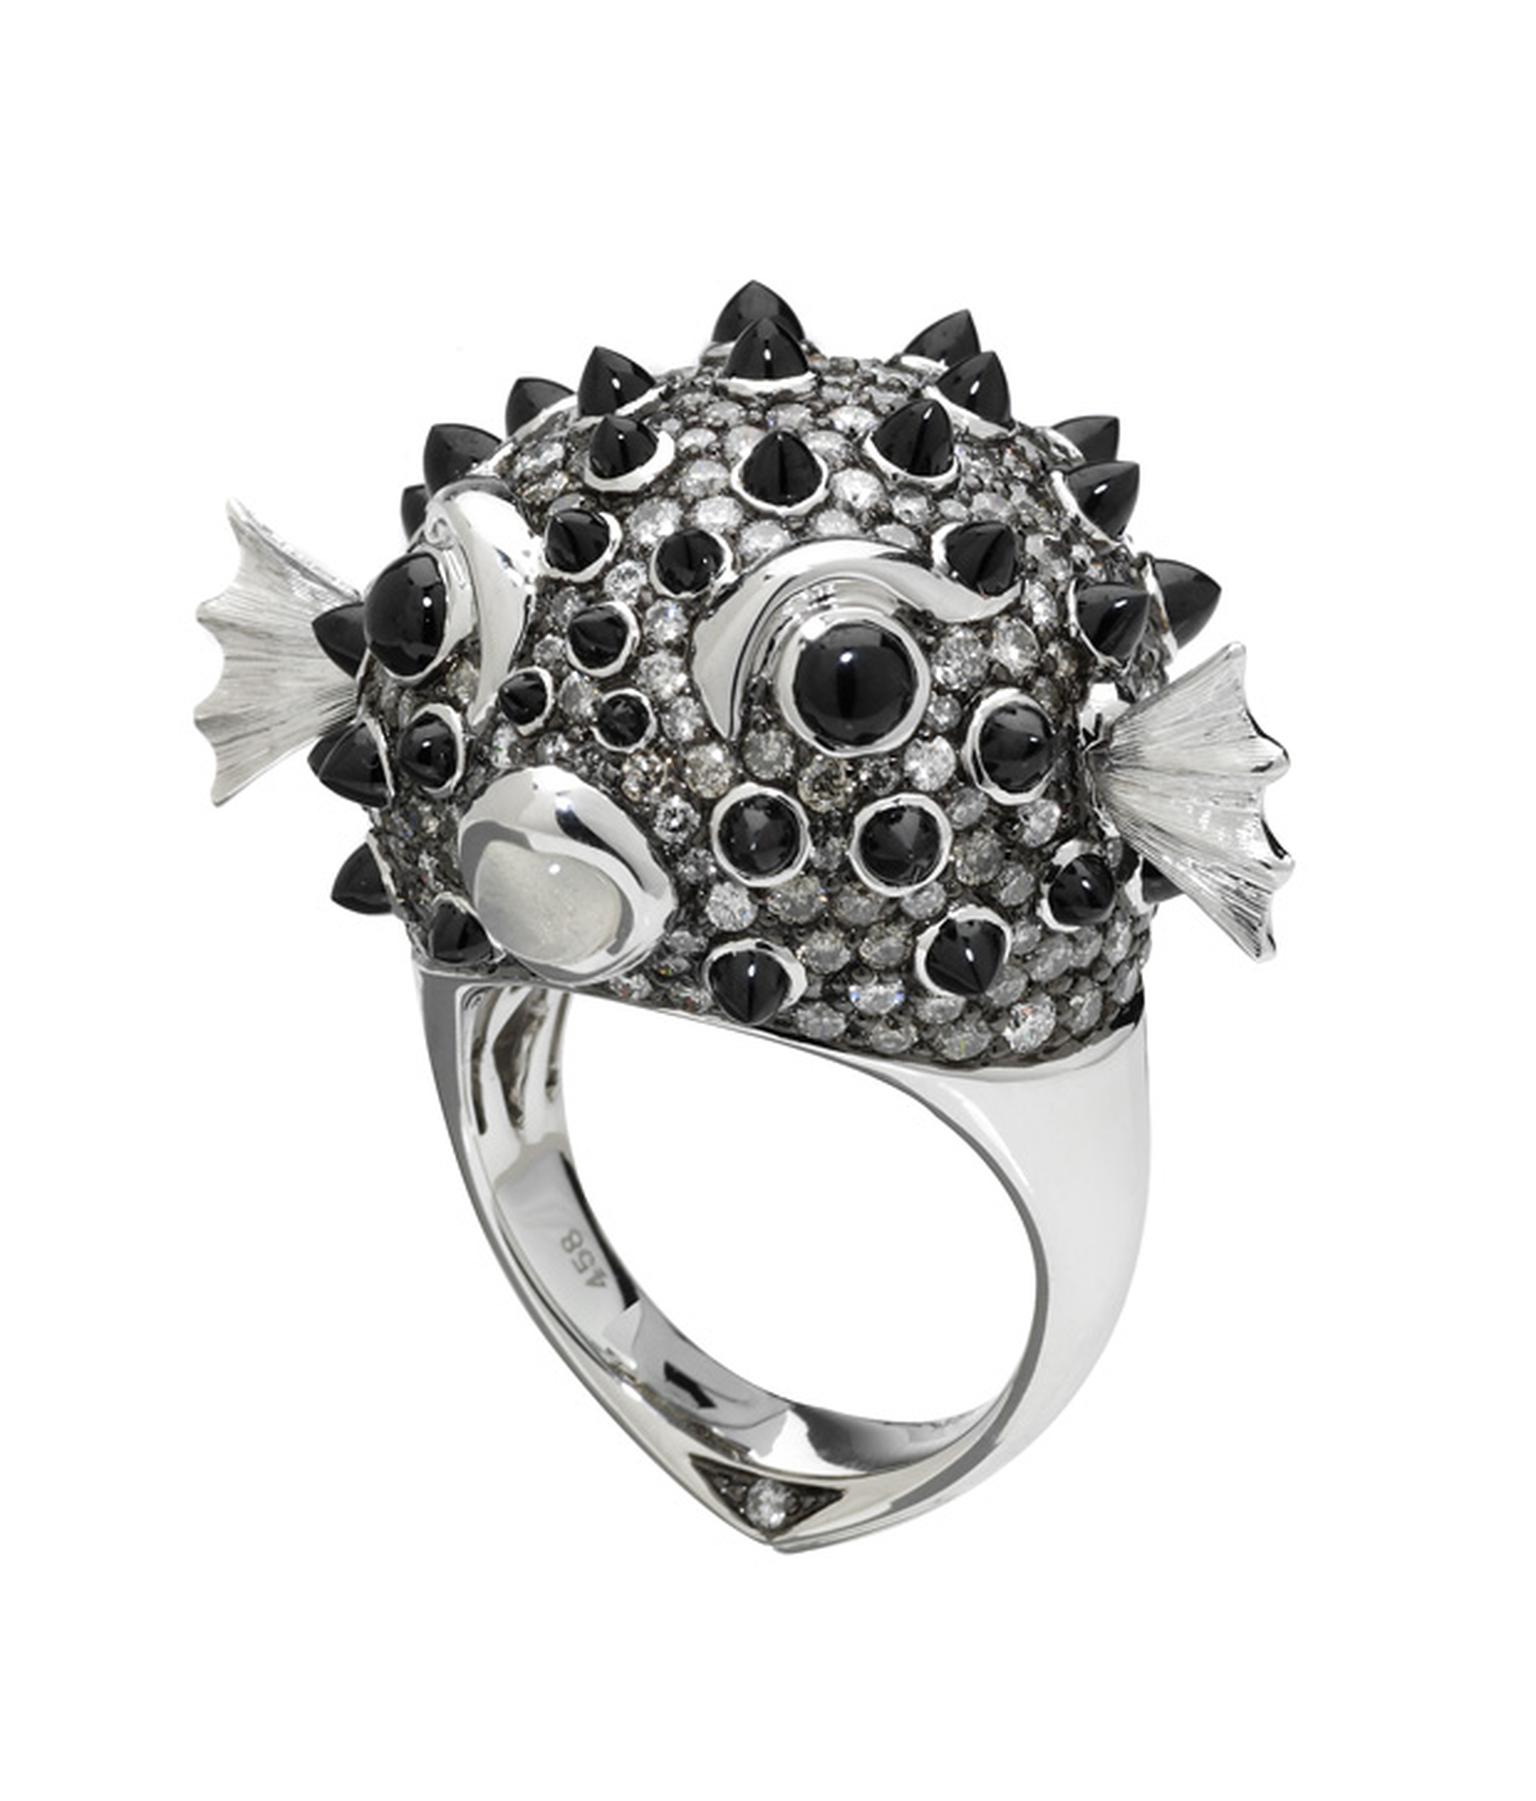 Stephen Webster In the Deep Puffer Fish ring